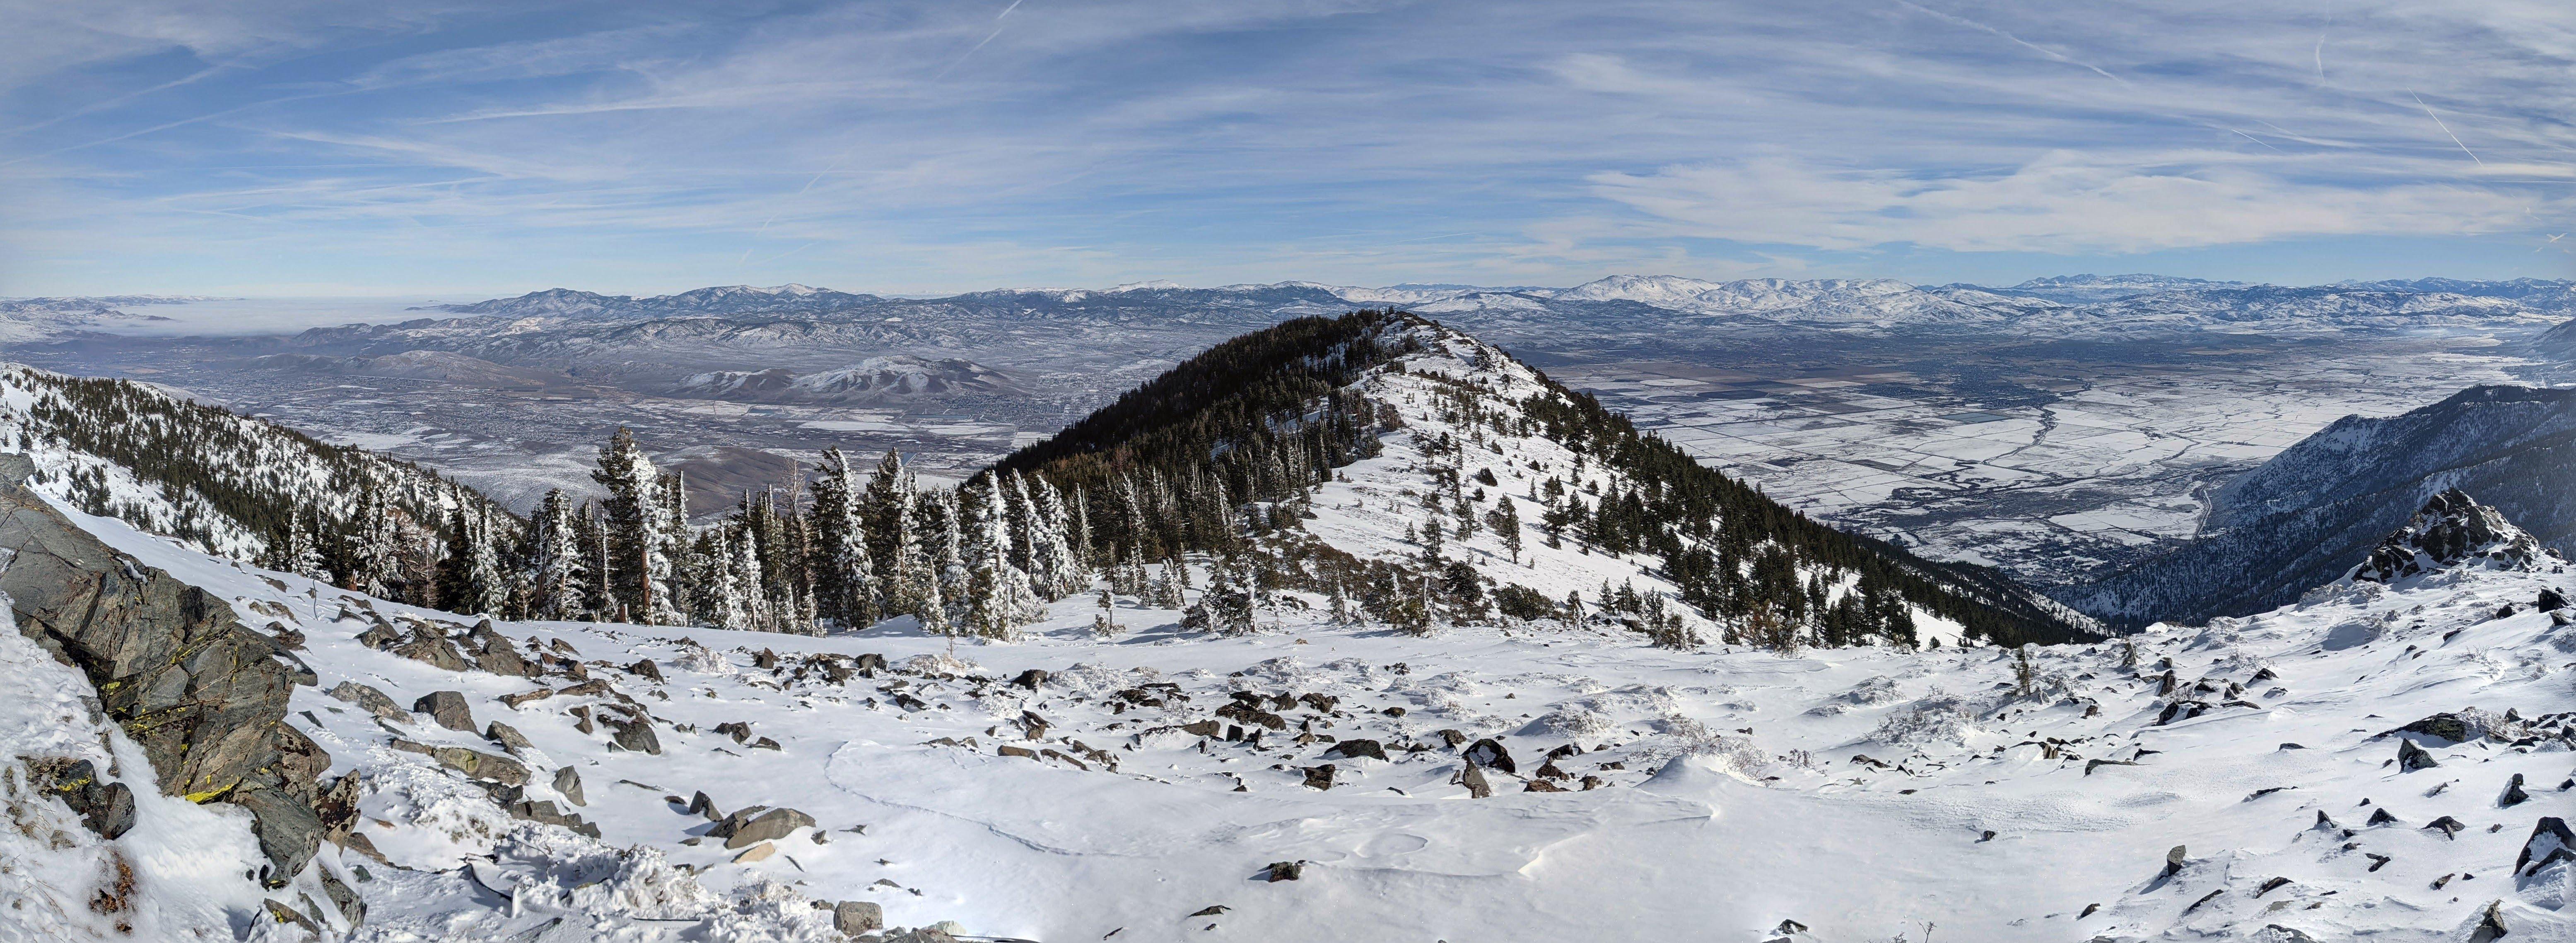 Eastern panorama, Carson Valley and Pine Nut Mountains